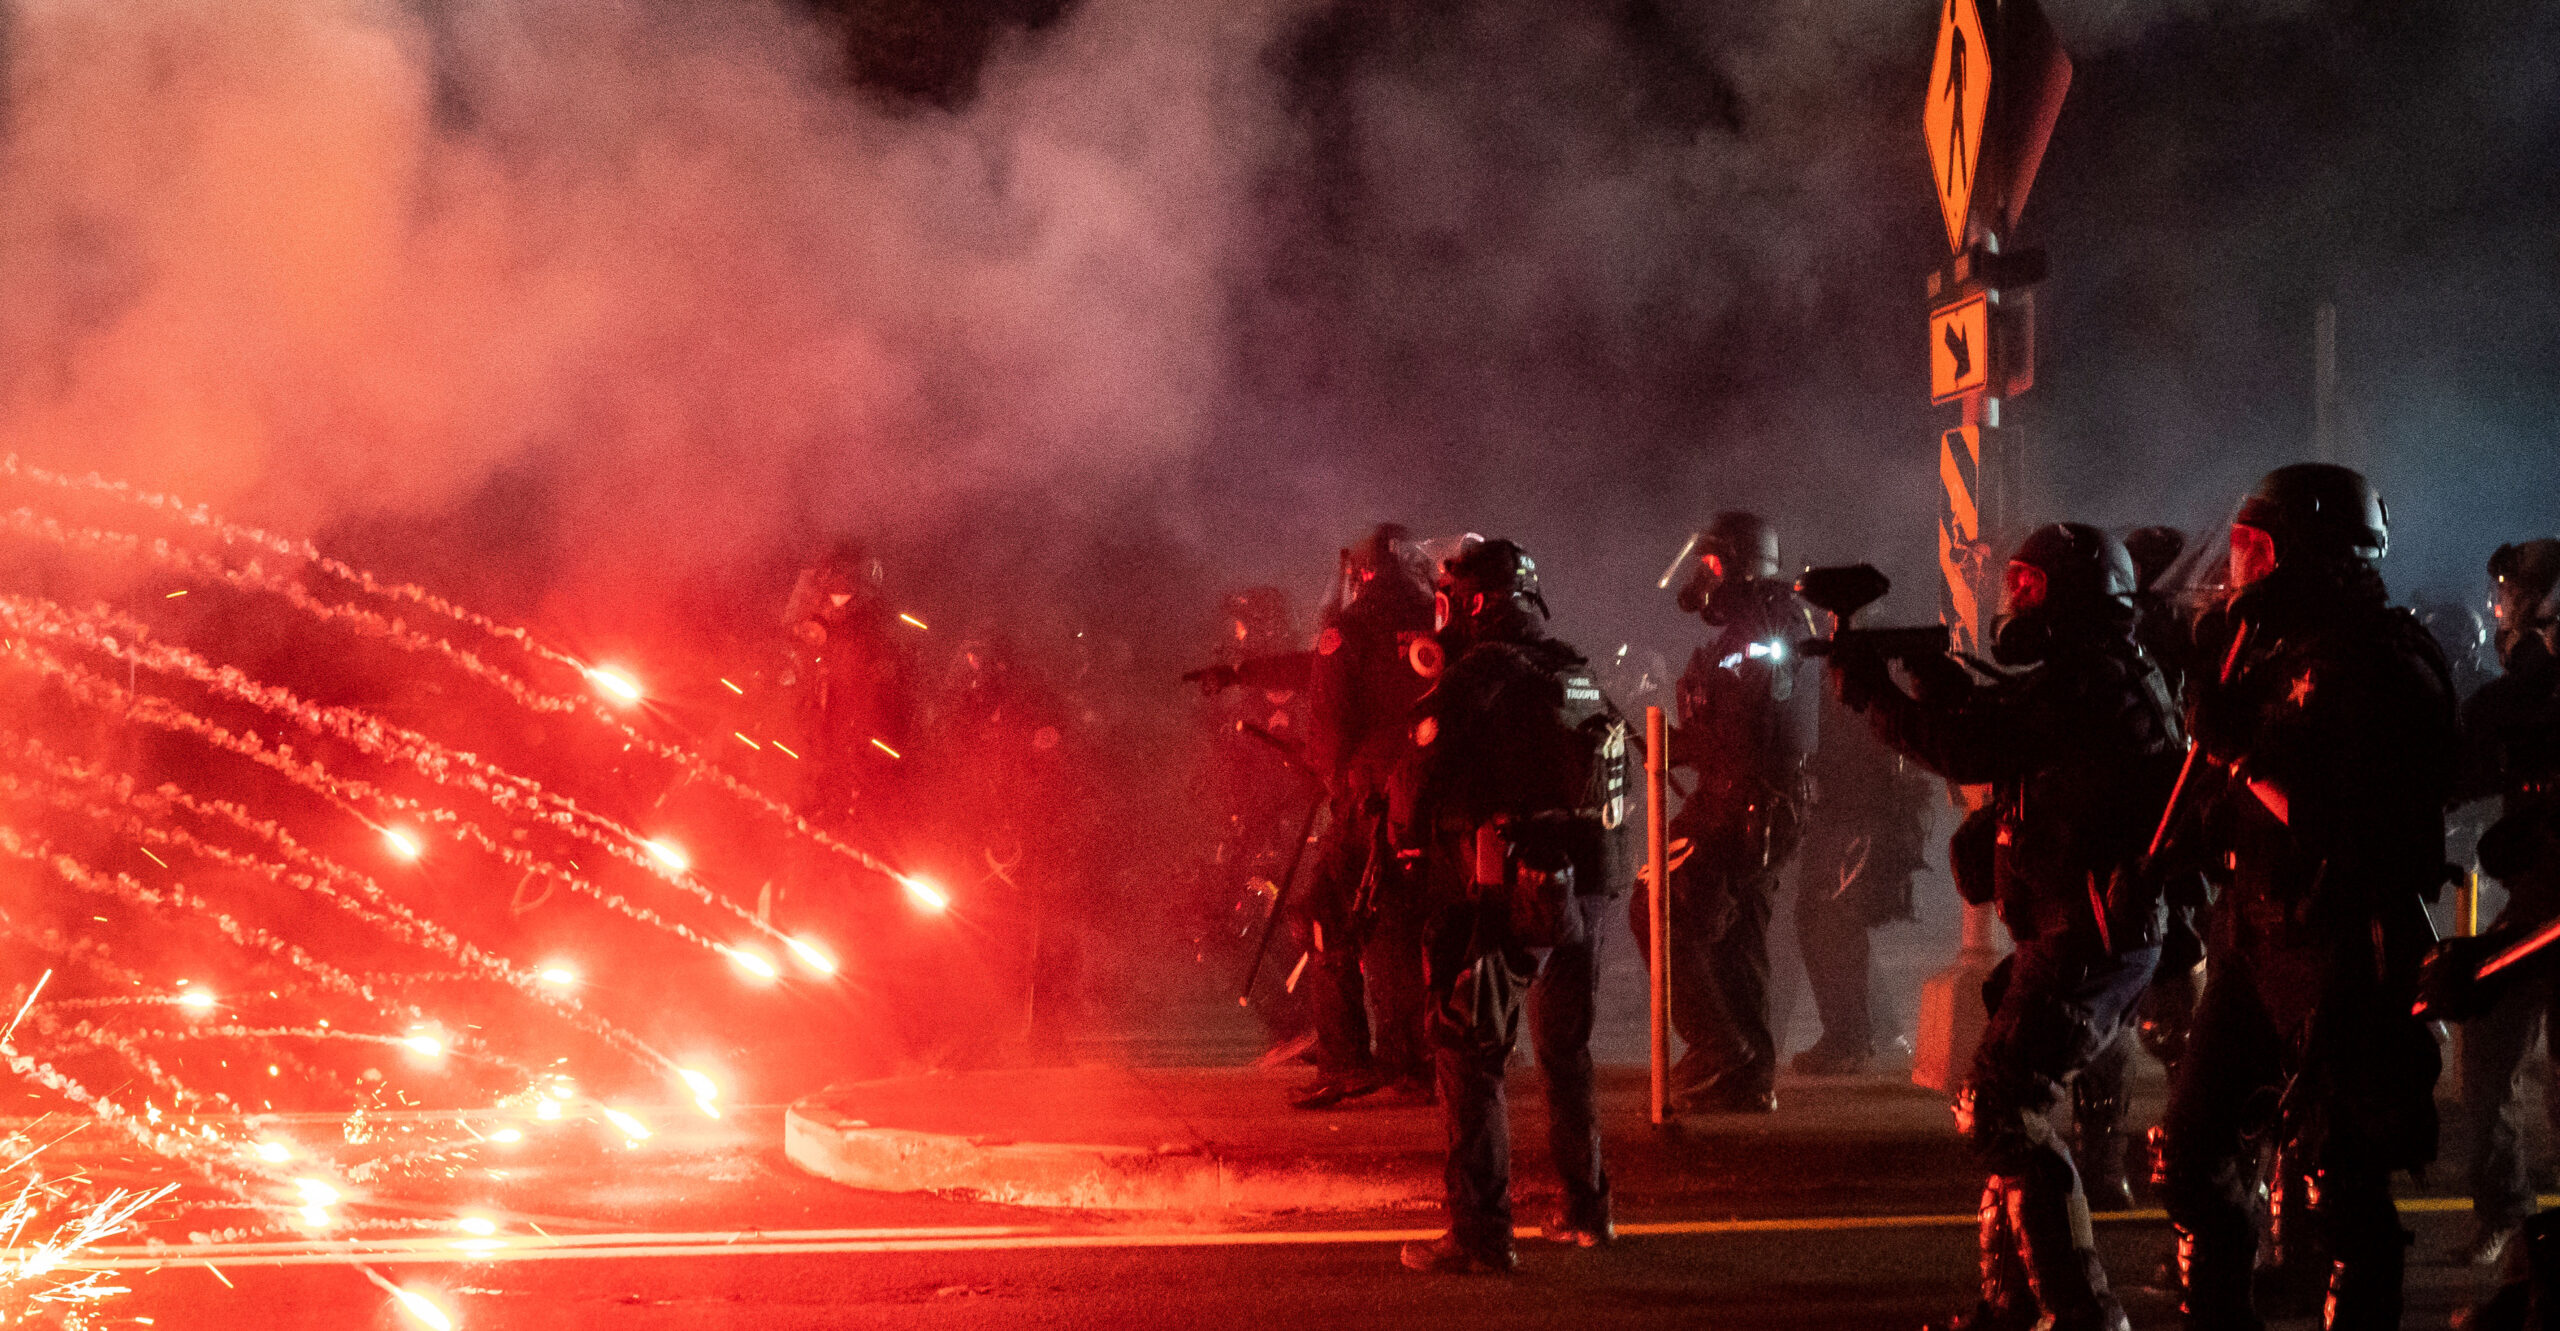 ICYMI: 'Spontaneous' Street Violence Is Well Organized, Pursuing a Radical Agenda